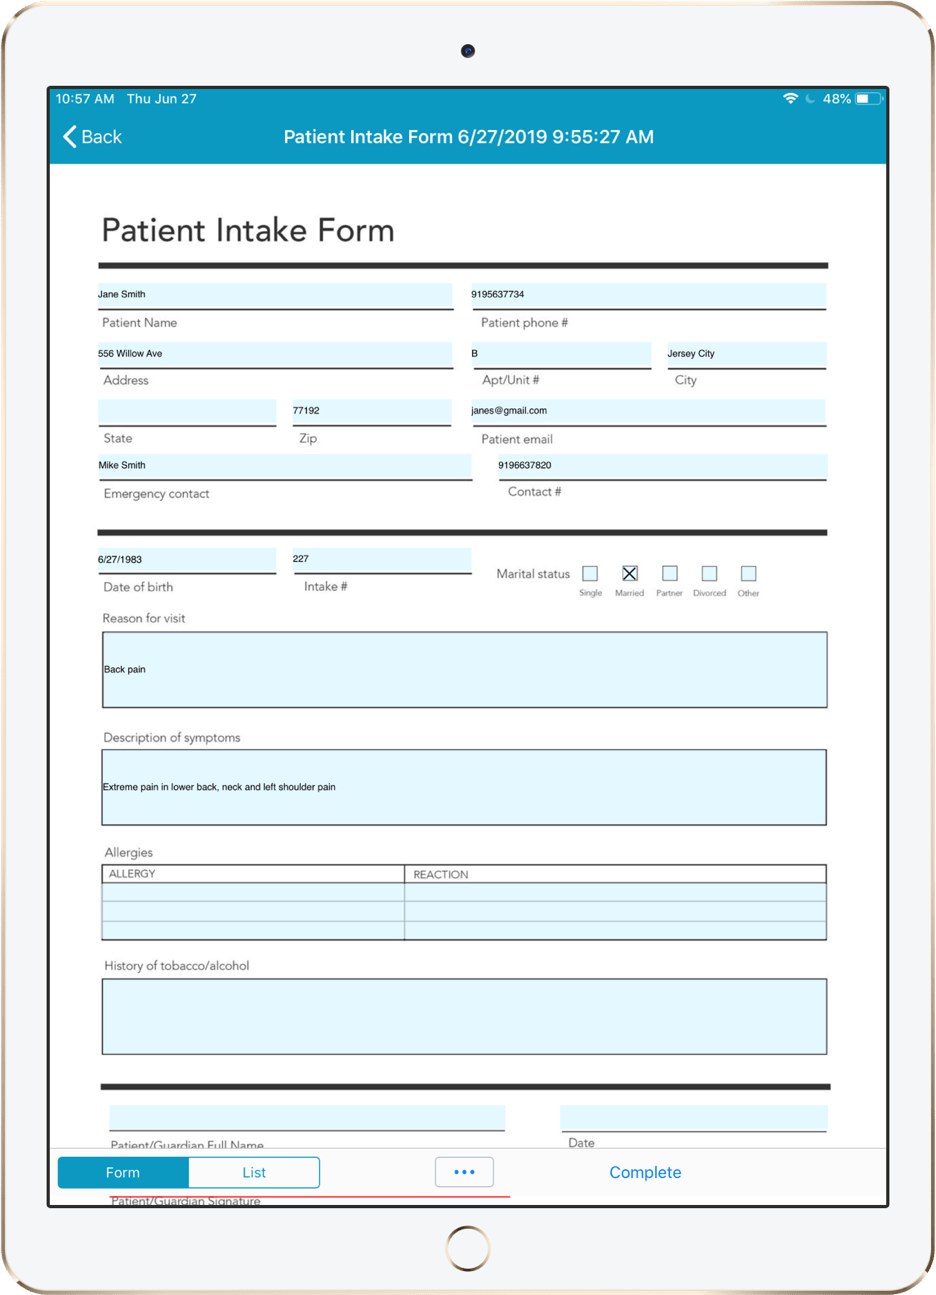 A digital patient intake form shown on a tablet.